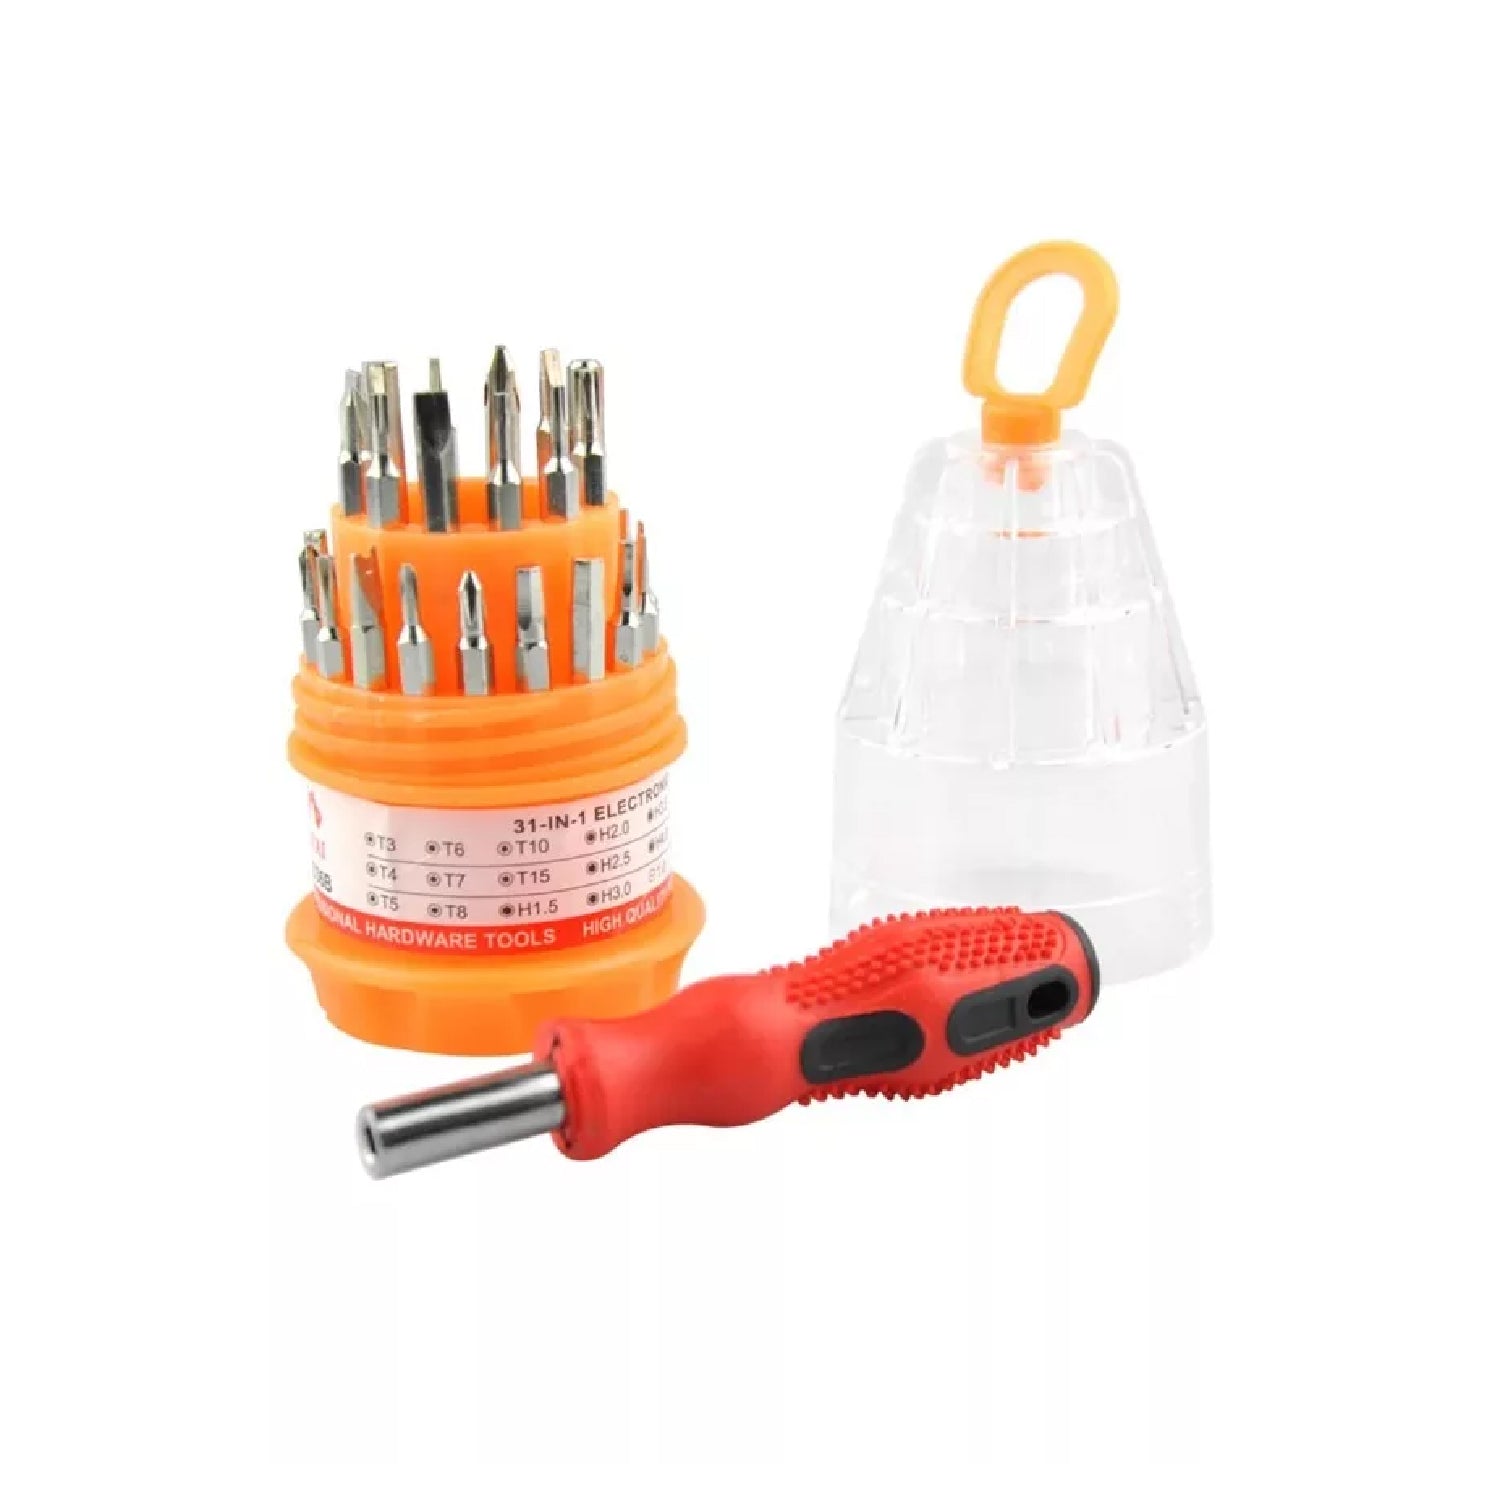 9110 (SET OF 4PC) SCREWDRIVER SET, STEEL 31 IN 1 WITH 30 SCREWDRIVER BITS, PROFESSIONAL MAGNETIC DRIVER SET 